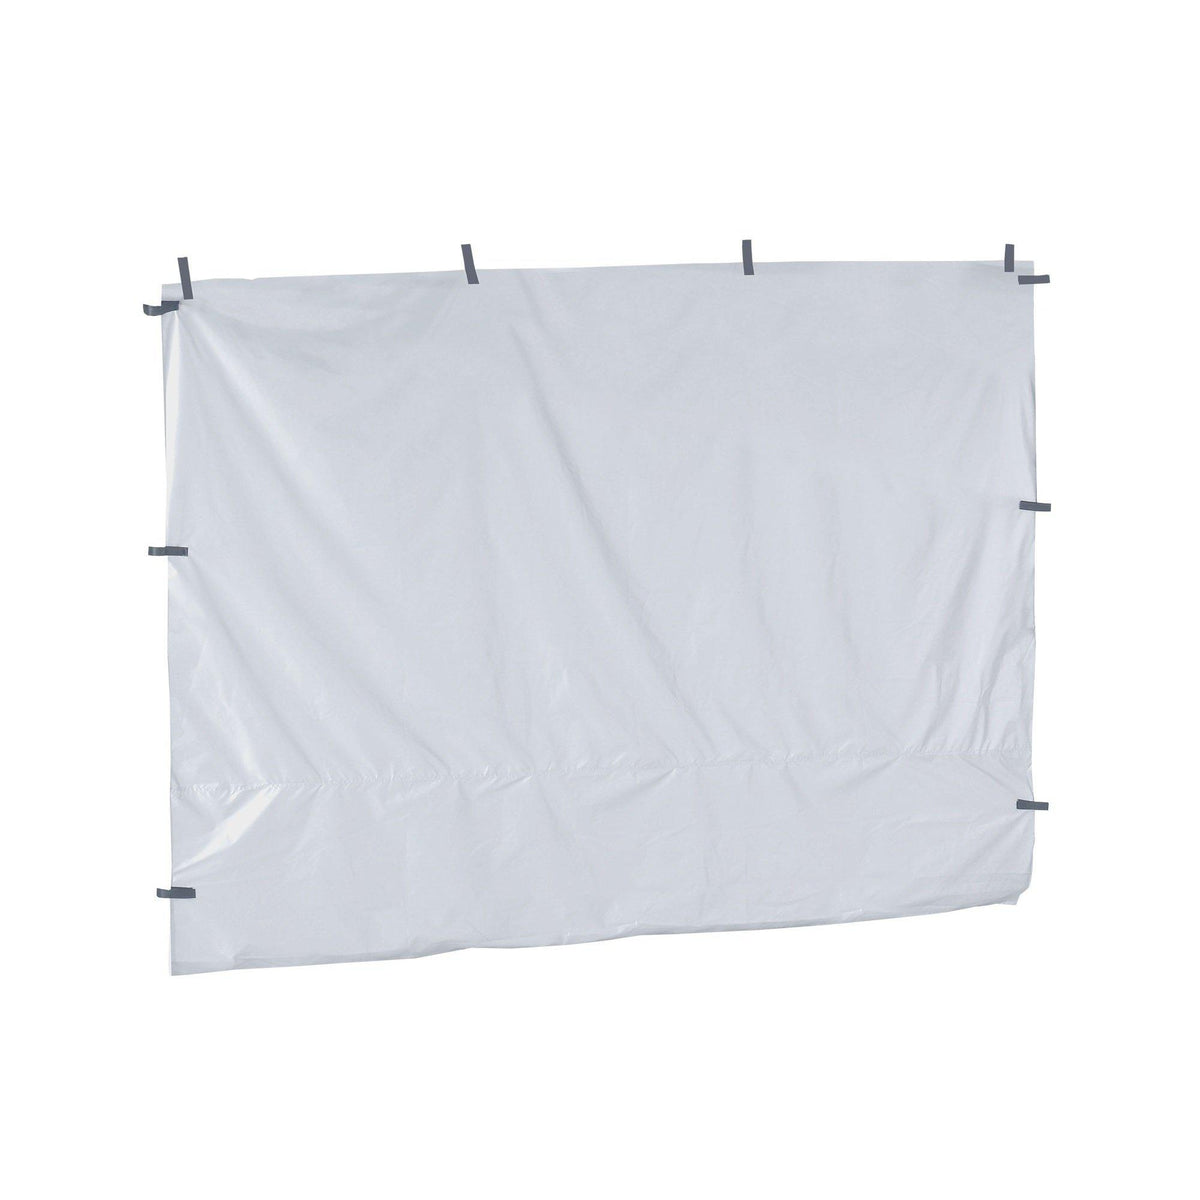 Quik Shade Canopy Wall Panel, White, 10'x10'